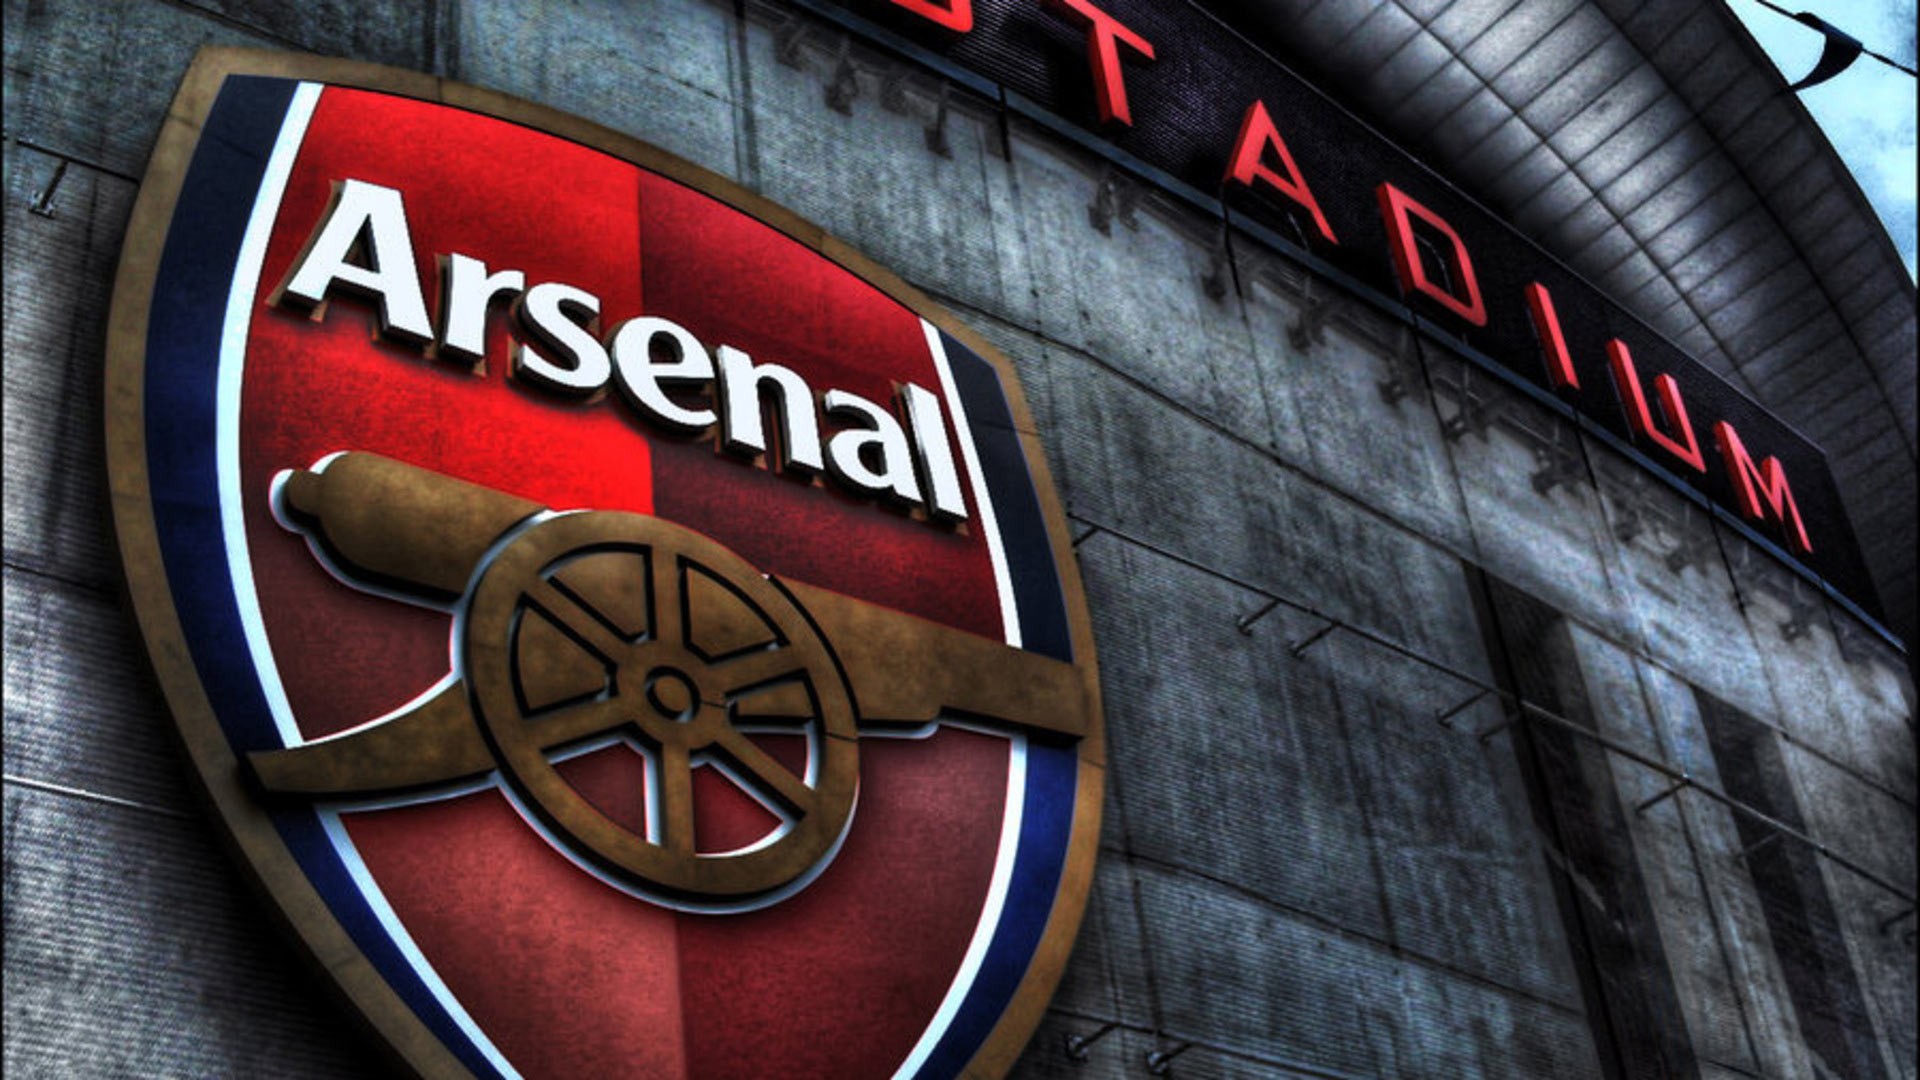 arsenal football club logo wallpaper hd backgrounds for mobile and pc 1920x1080